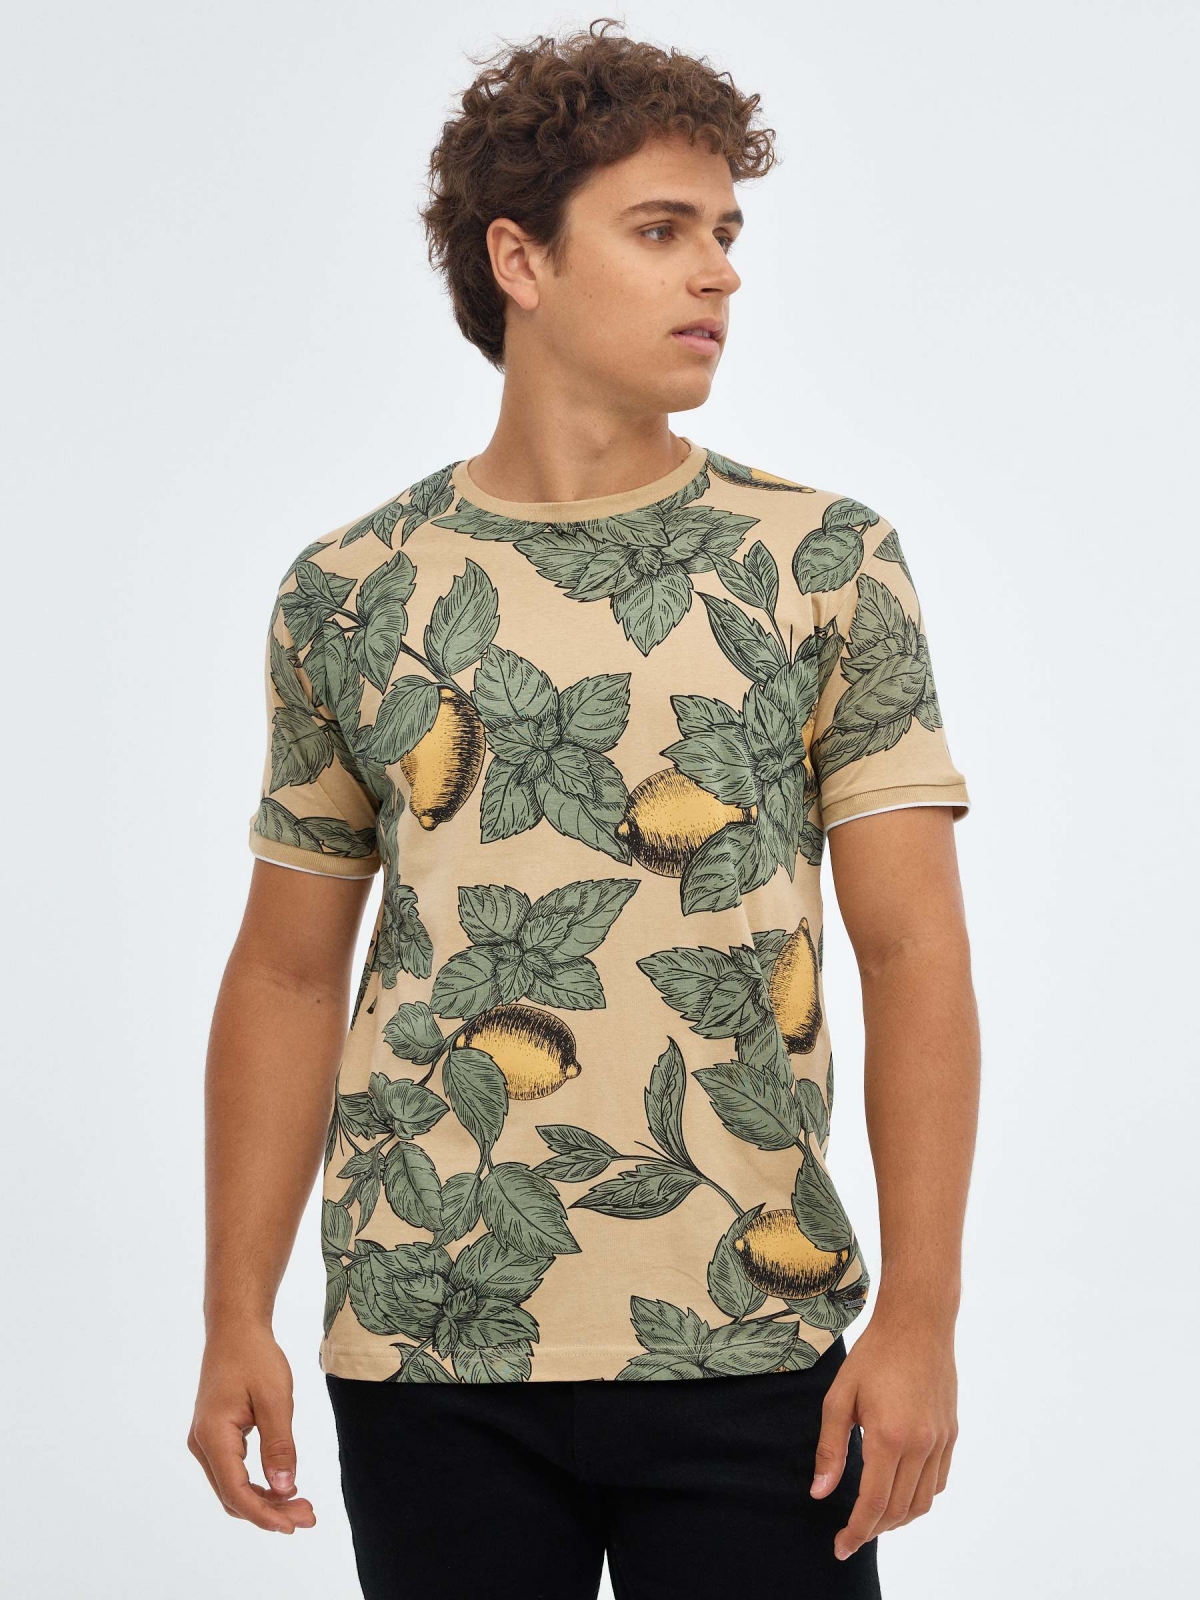 Fruit print t-shirt sand middle front view